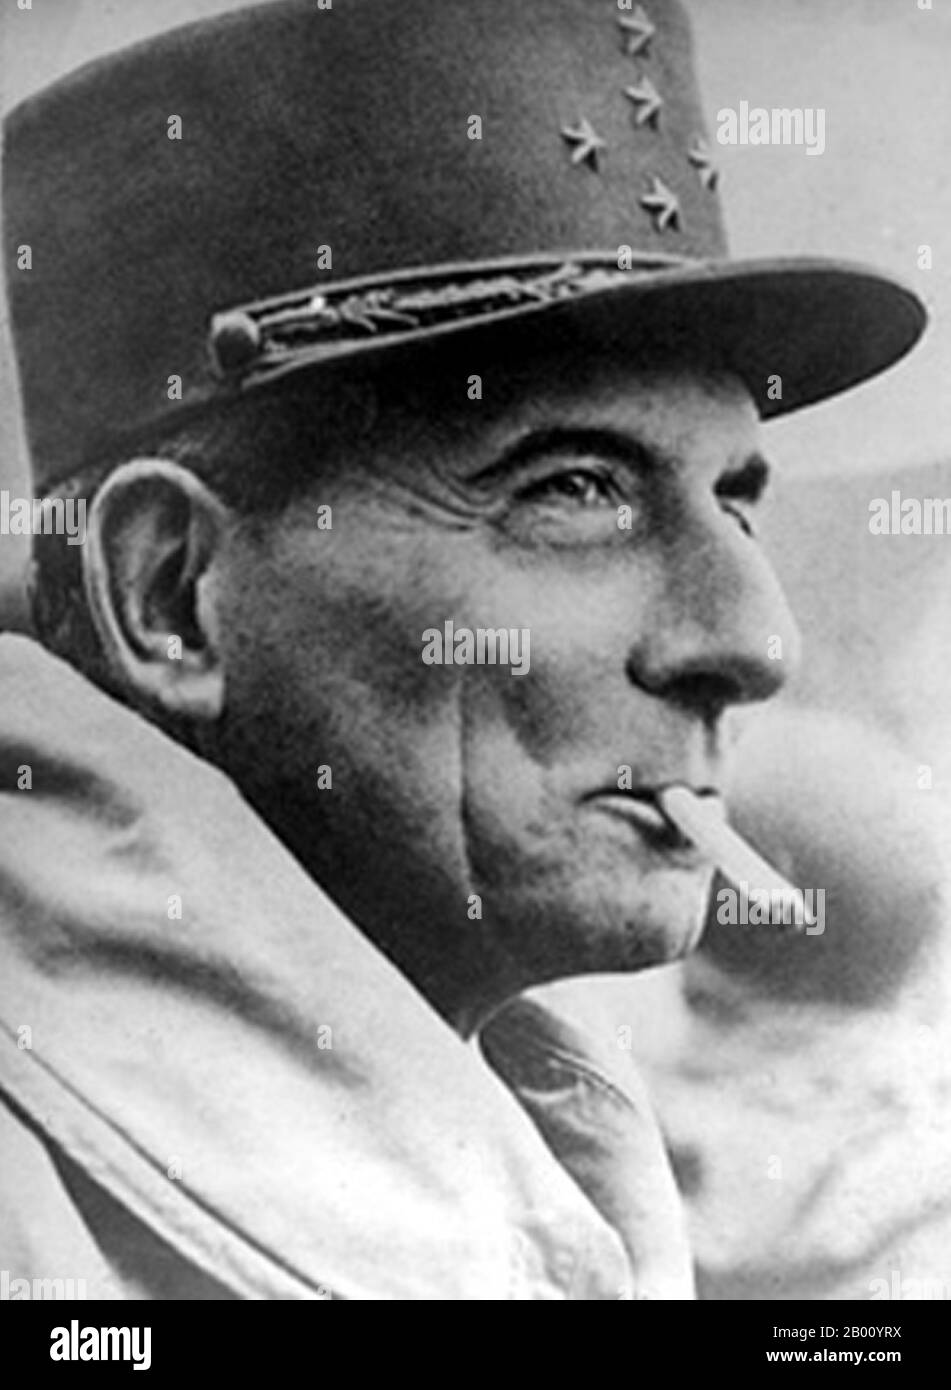 Vietnam: General Jean de Lattre de Tassigny (1889-1952), was a French military hero and commander in the First Indochina War.  Having fought in the First World War and Rif War (Second Moroccan War), the aristocratic de Tassigny (nickname: 'Roi Jean') was a hero of the Free French in World War II. Later, he commanded French troops in Indochina during the First Indochina War. He won three major victories at Vinh Yen, Mao Khe and Yen Cu Ha and successfully defended the north of the country against the Viet Minh but his only son, Bernard de Lattre de Tassigny, was killed in action during the war. Stock Photo